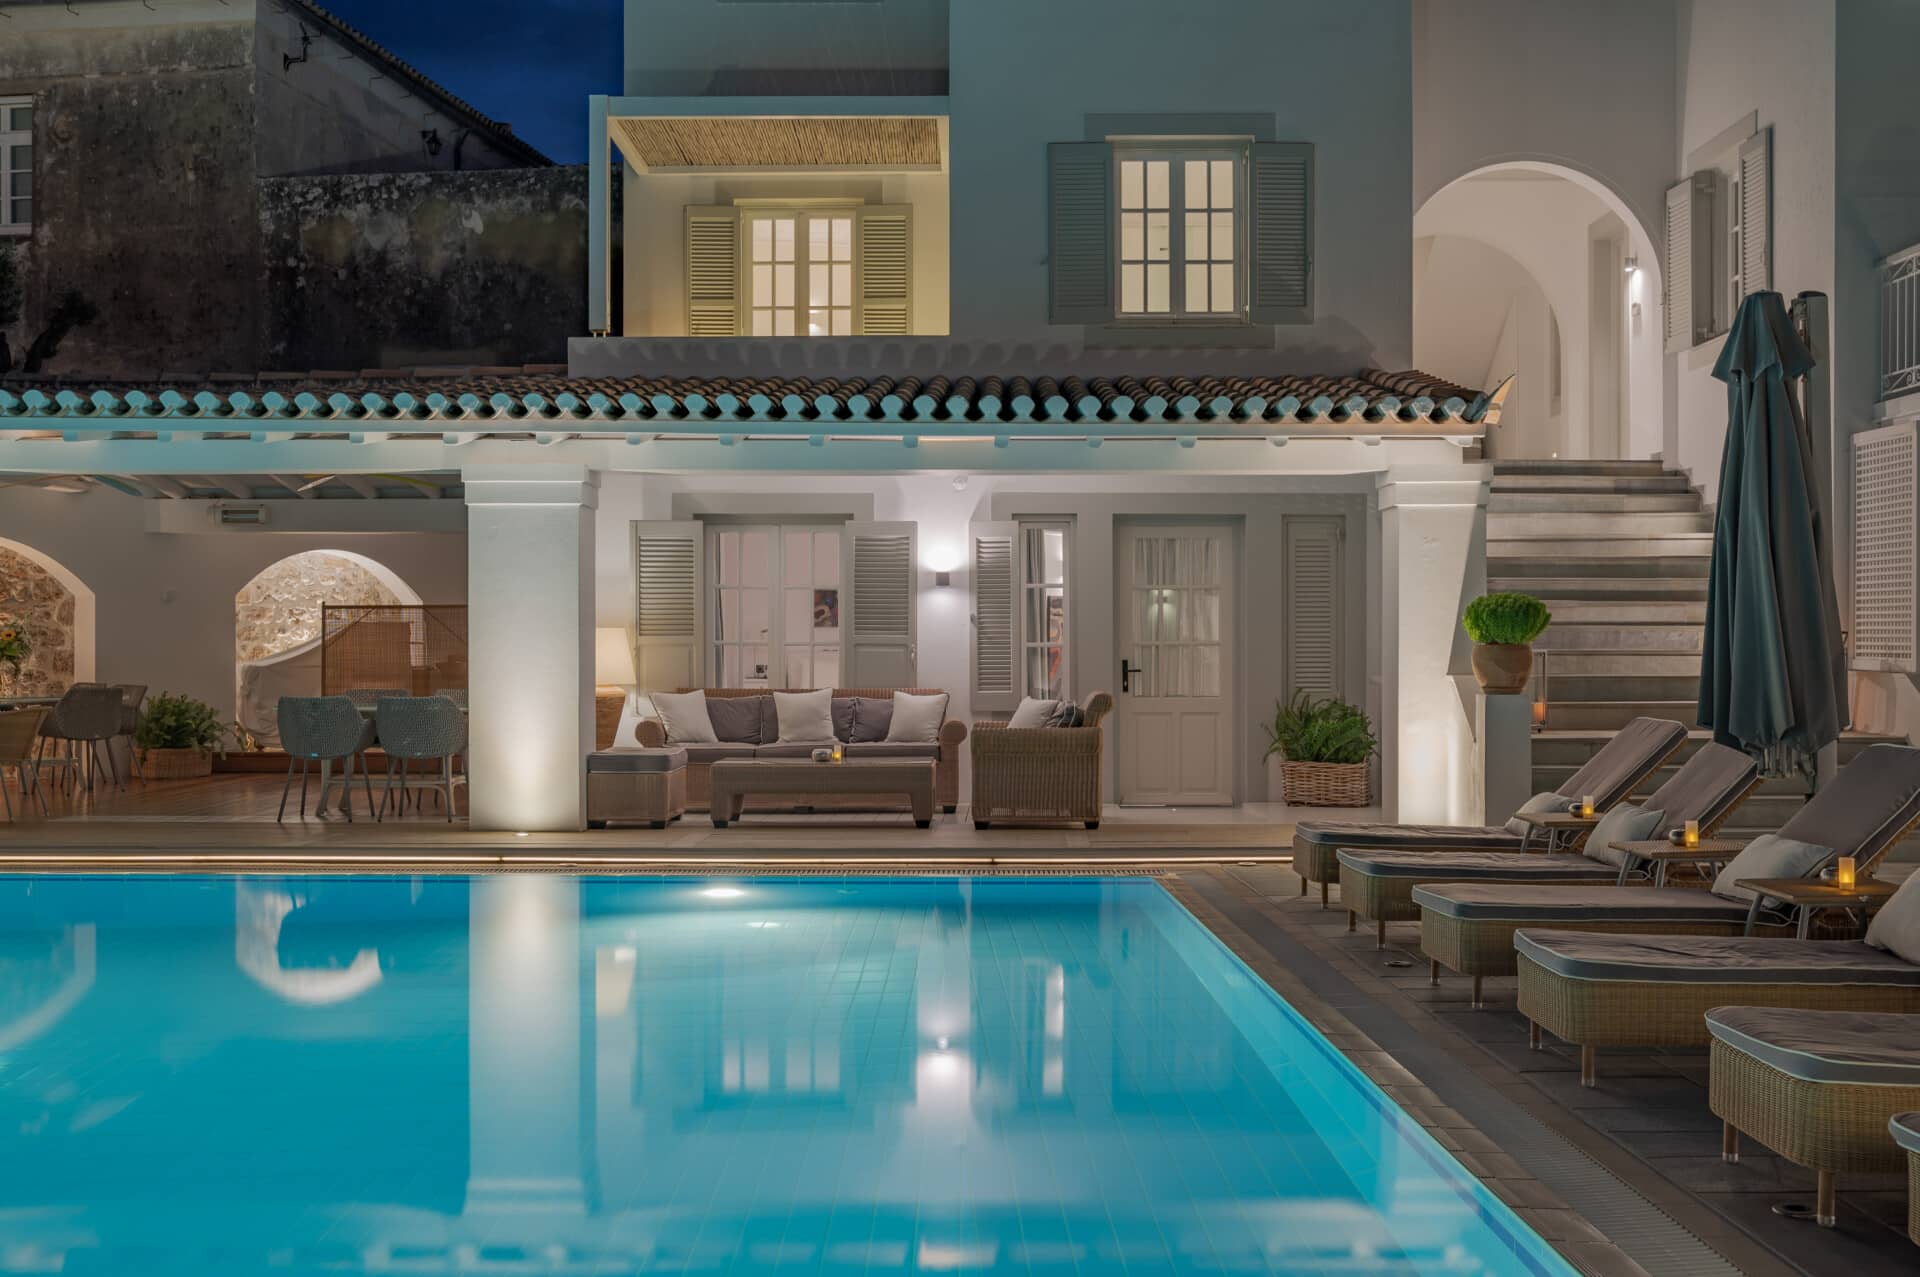 The main swimming pool of Zoe's Club Hotel frames the guest experience staying in our elegant Spetses accommodation options